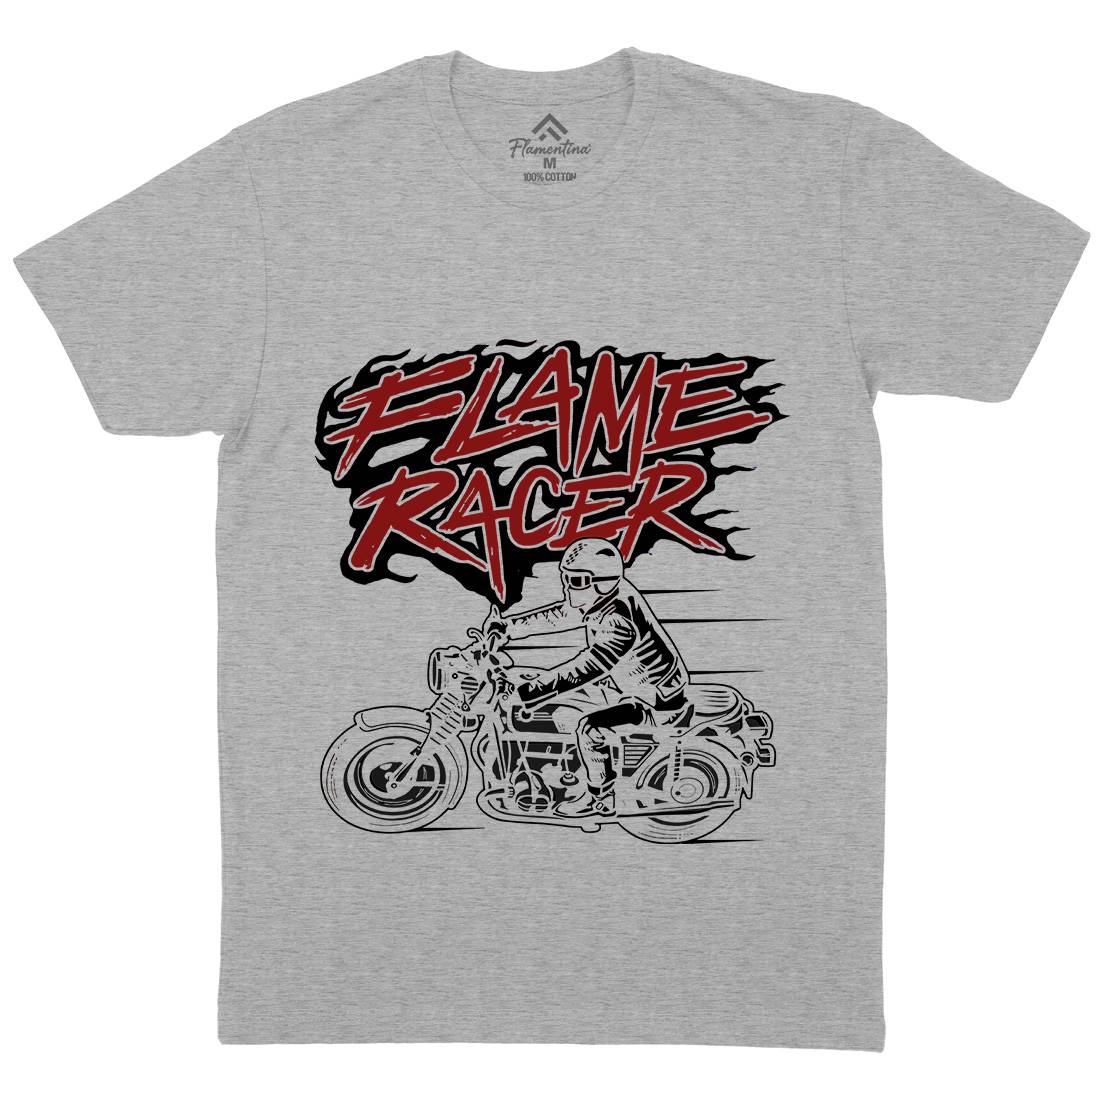 Flame Racer Mens Crew Neck T-Shirt Motorcycles A530